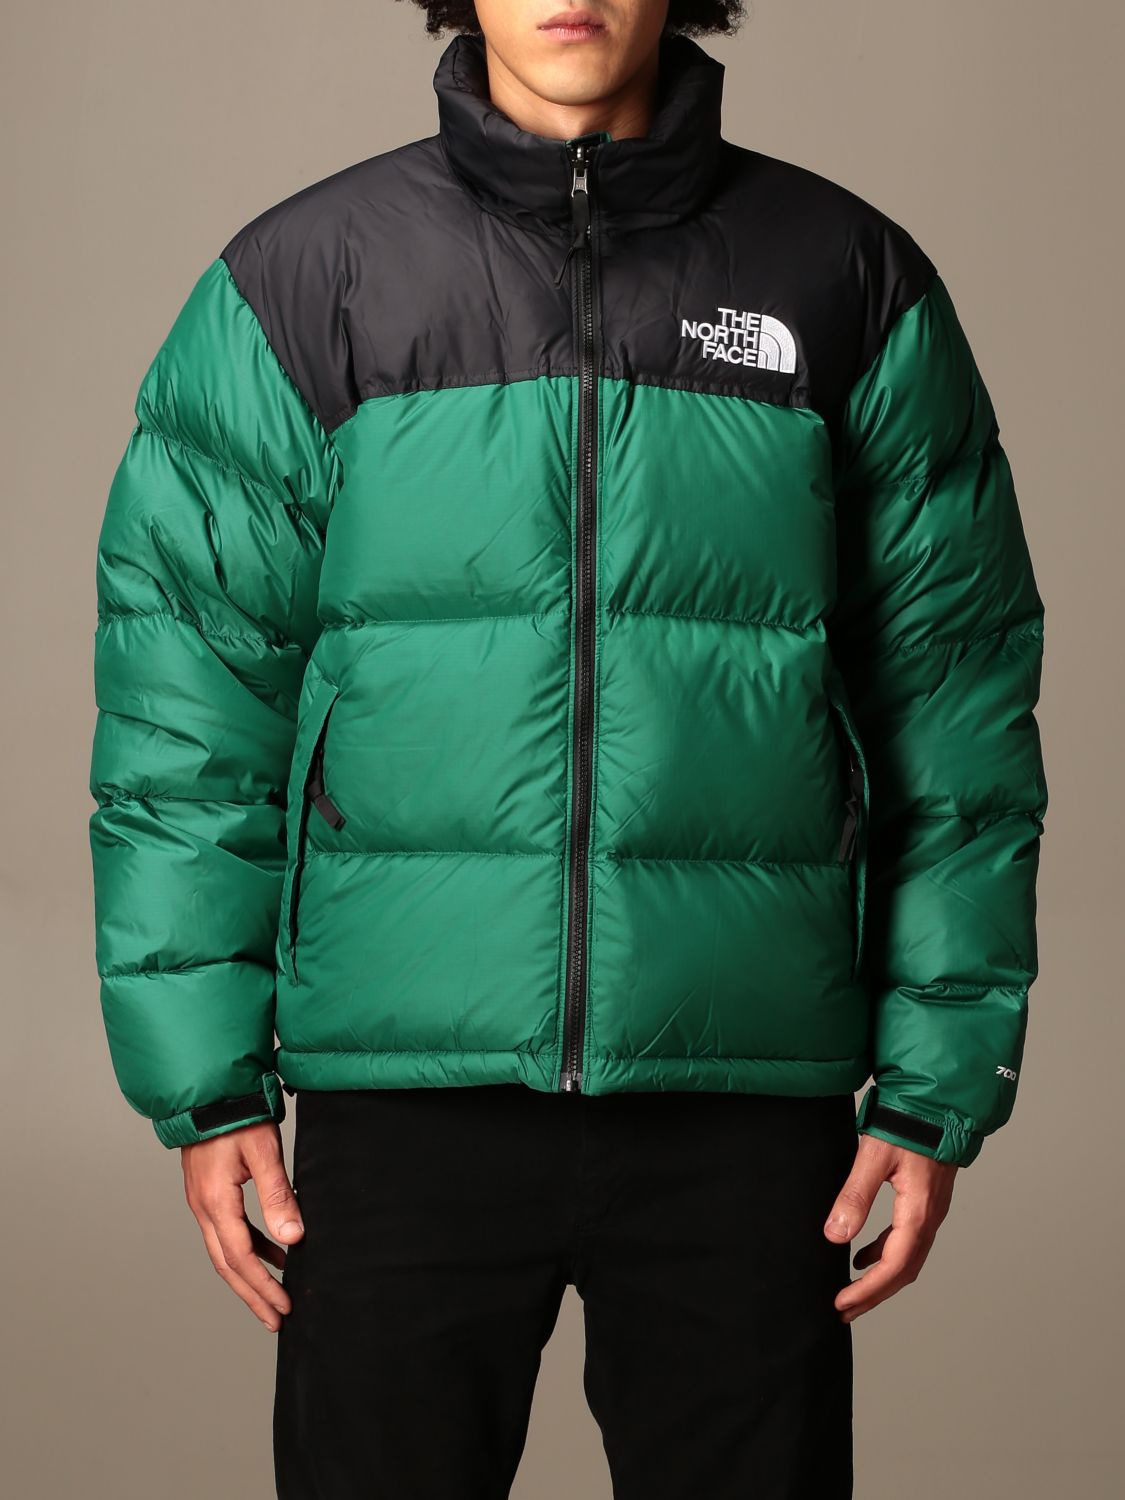 Hubert Hudson shit Darmen THE NORTH FACE: Nuptse bicolor down jacket - Green | The North Face jacket  NF0A3C8D online on GIGLIO.COM